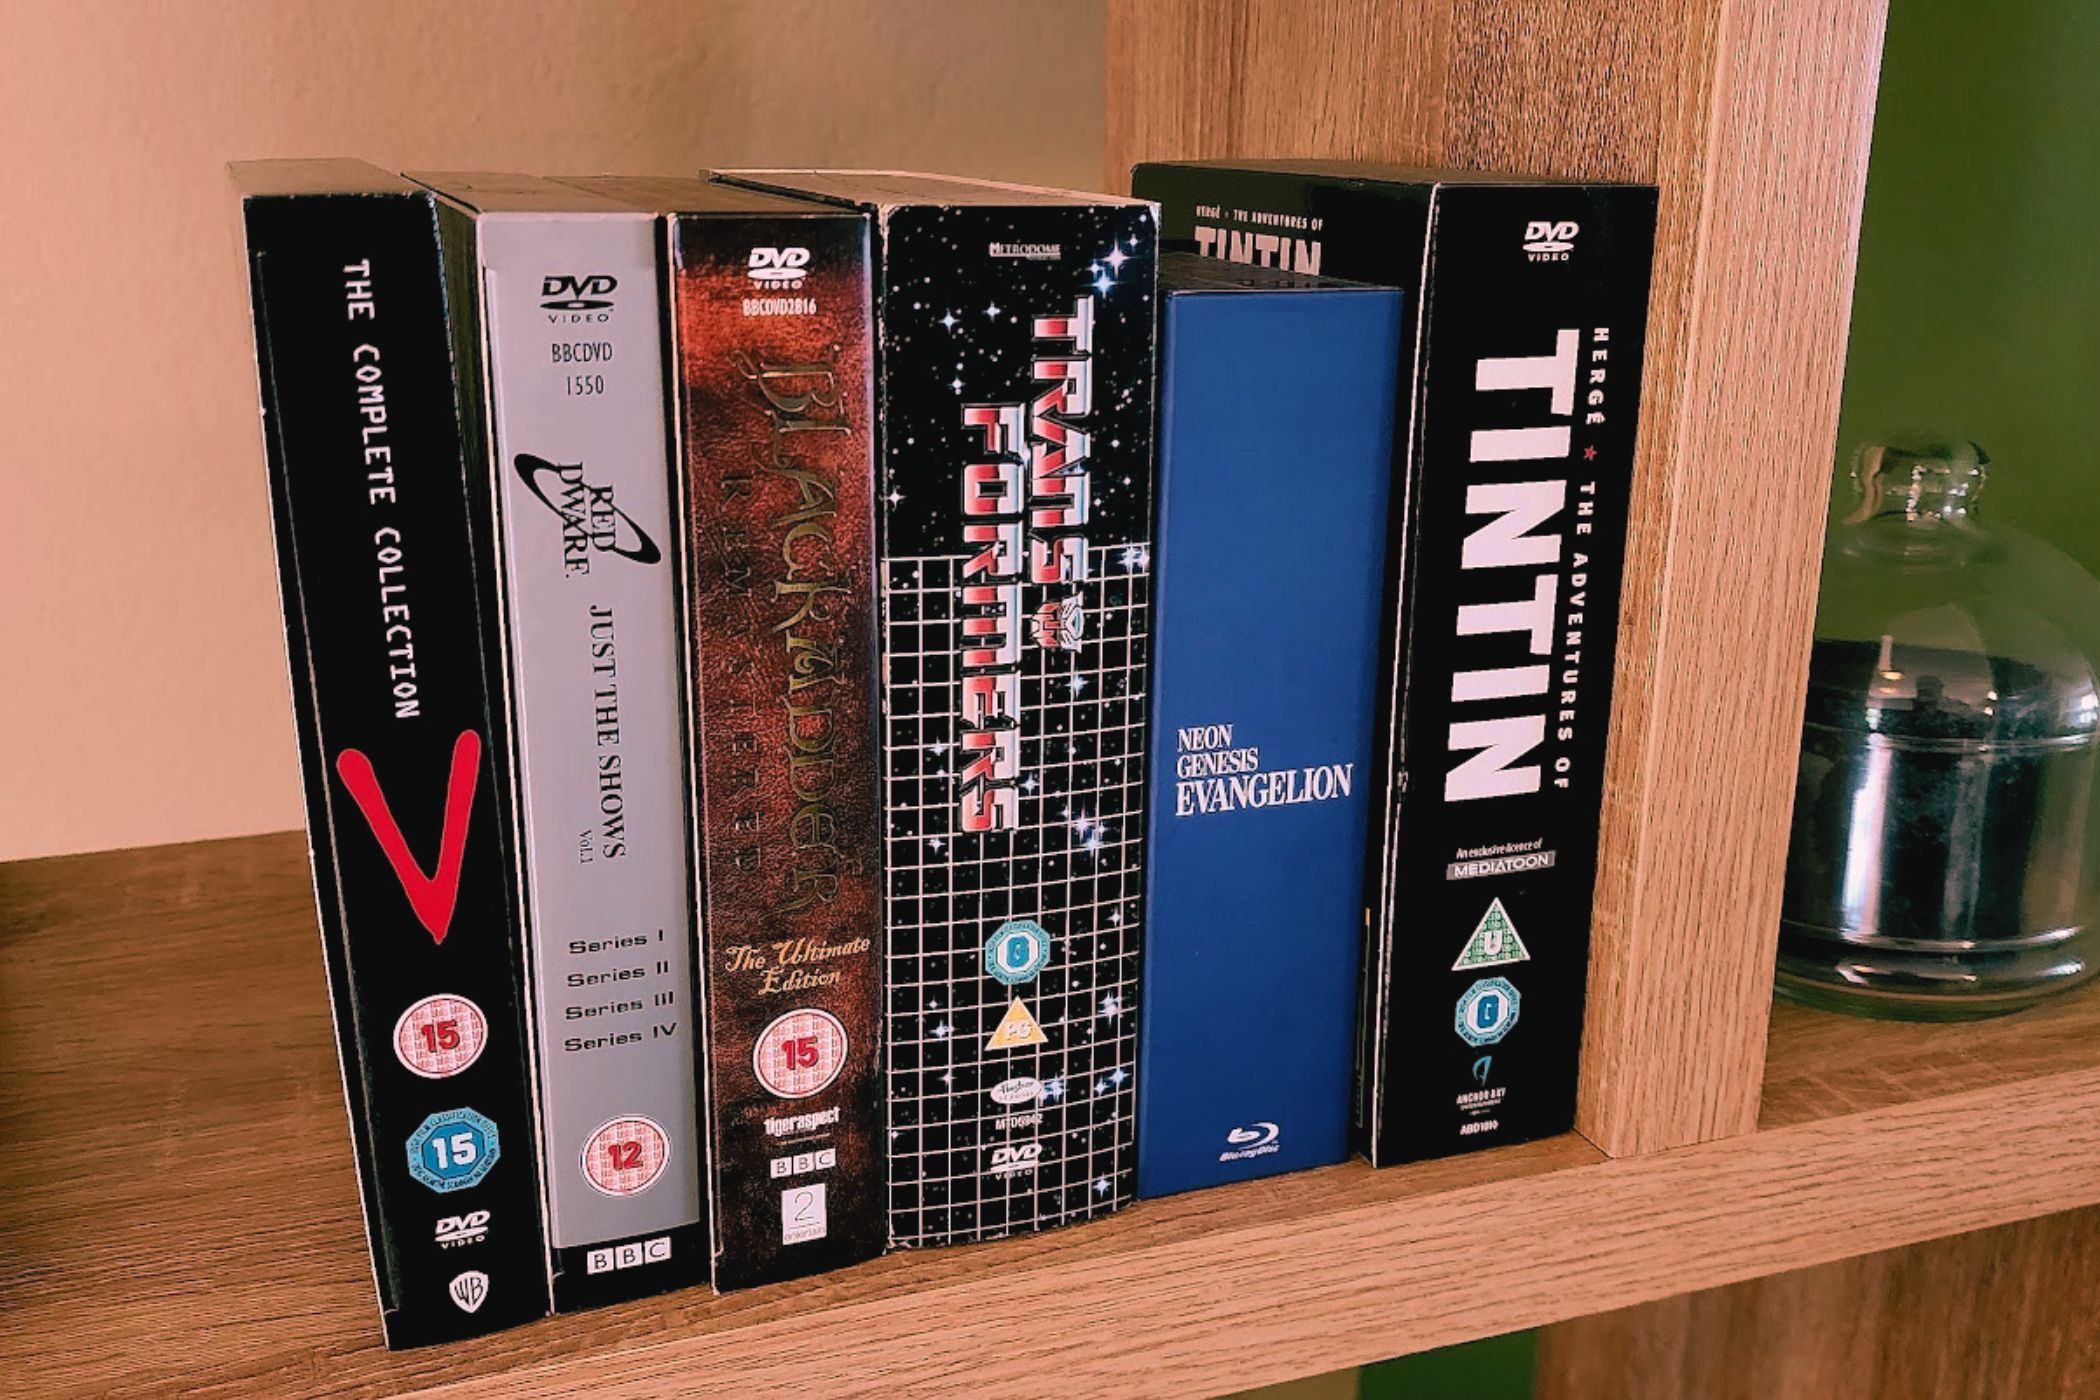 A shelf with several TV series box sets on it, including Red Dwarf, Transformers, Tintin, Black Adder, V the Series, and Neon Genesis Evangelion